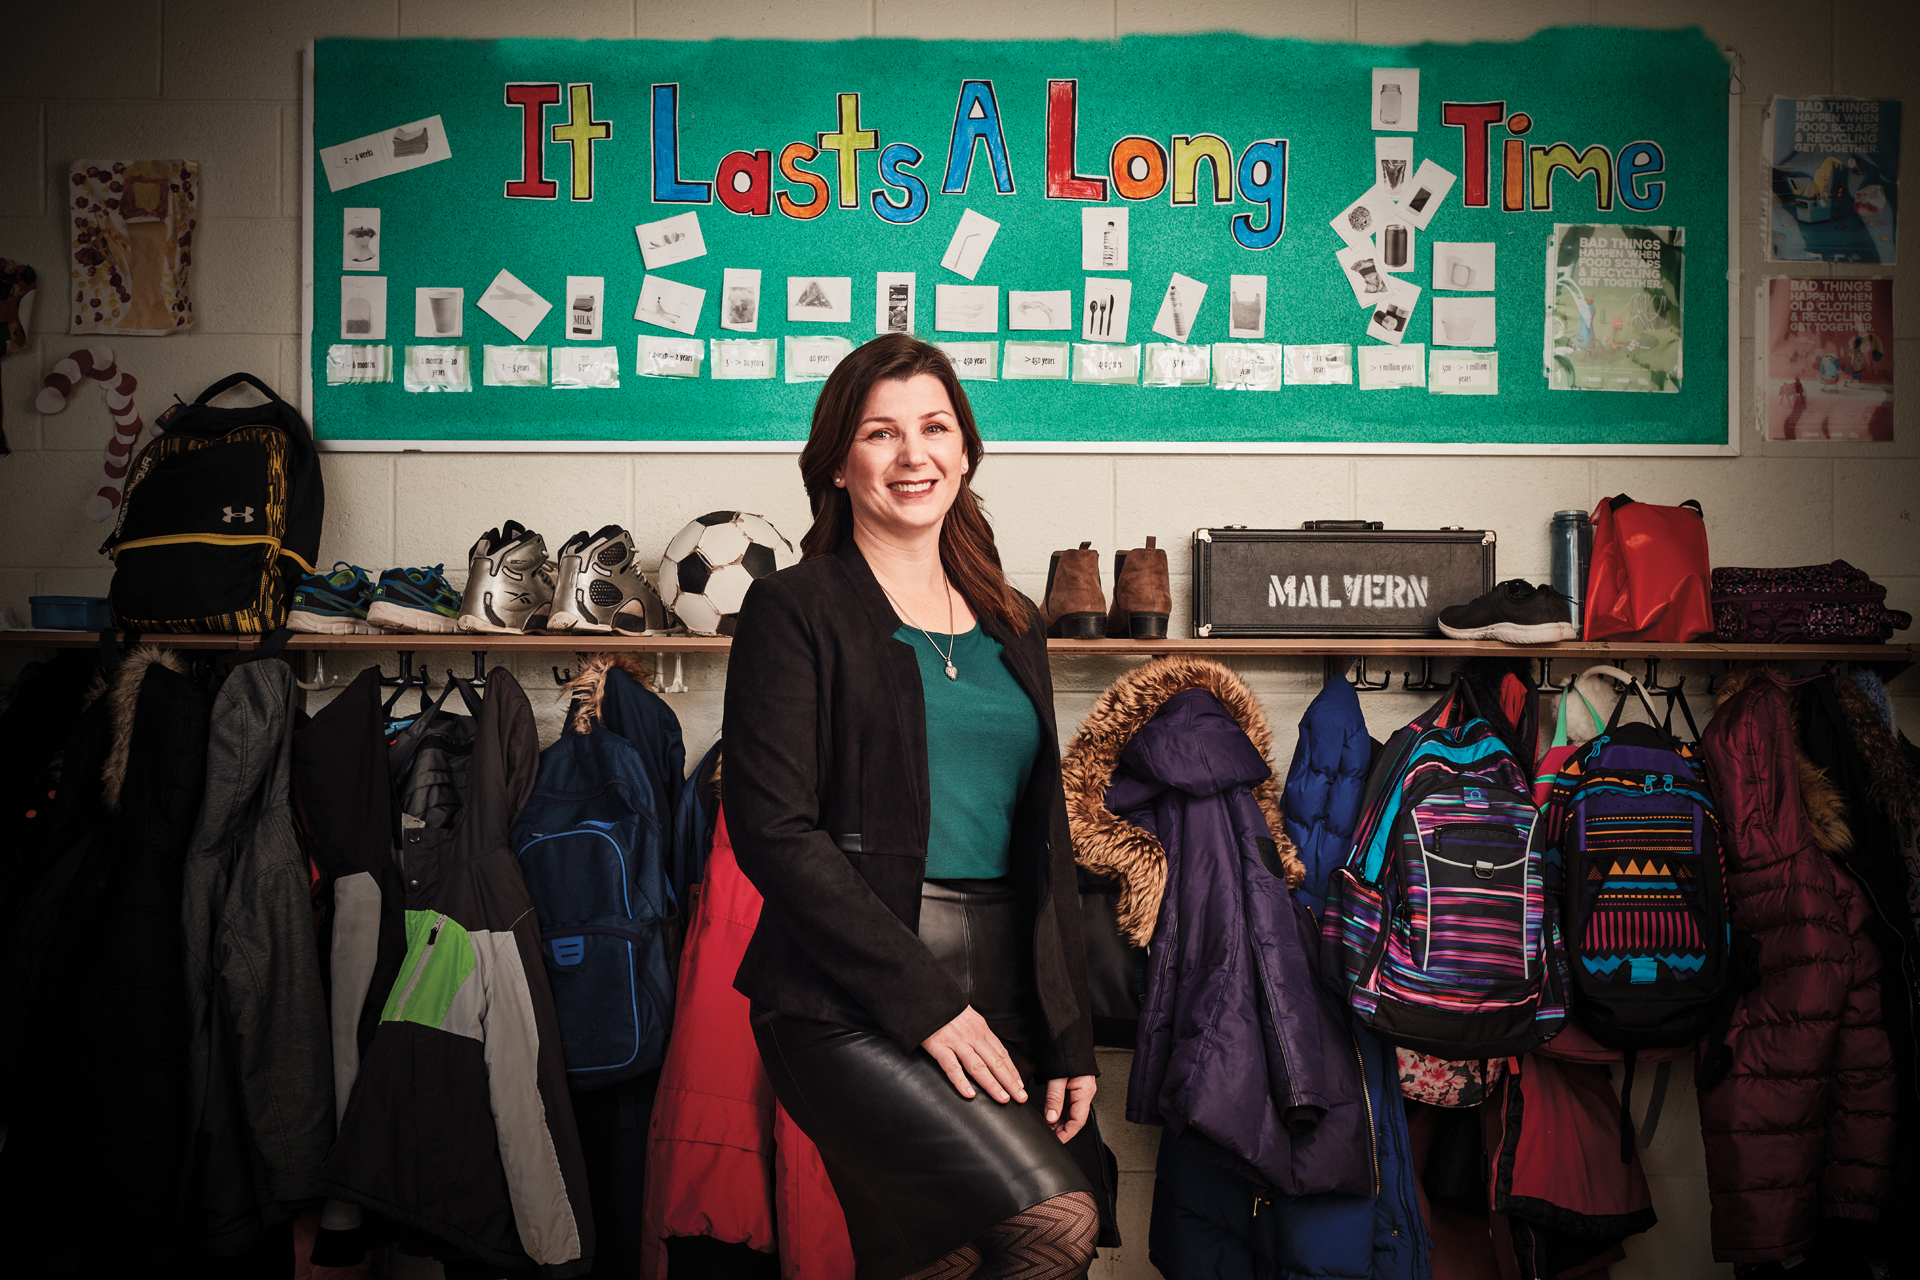 Photo of a teacher smiling in a classroom from an article in the March 2019 issue of 'Professionally Speaking'.